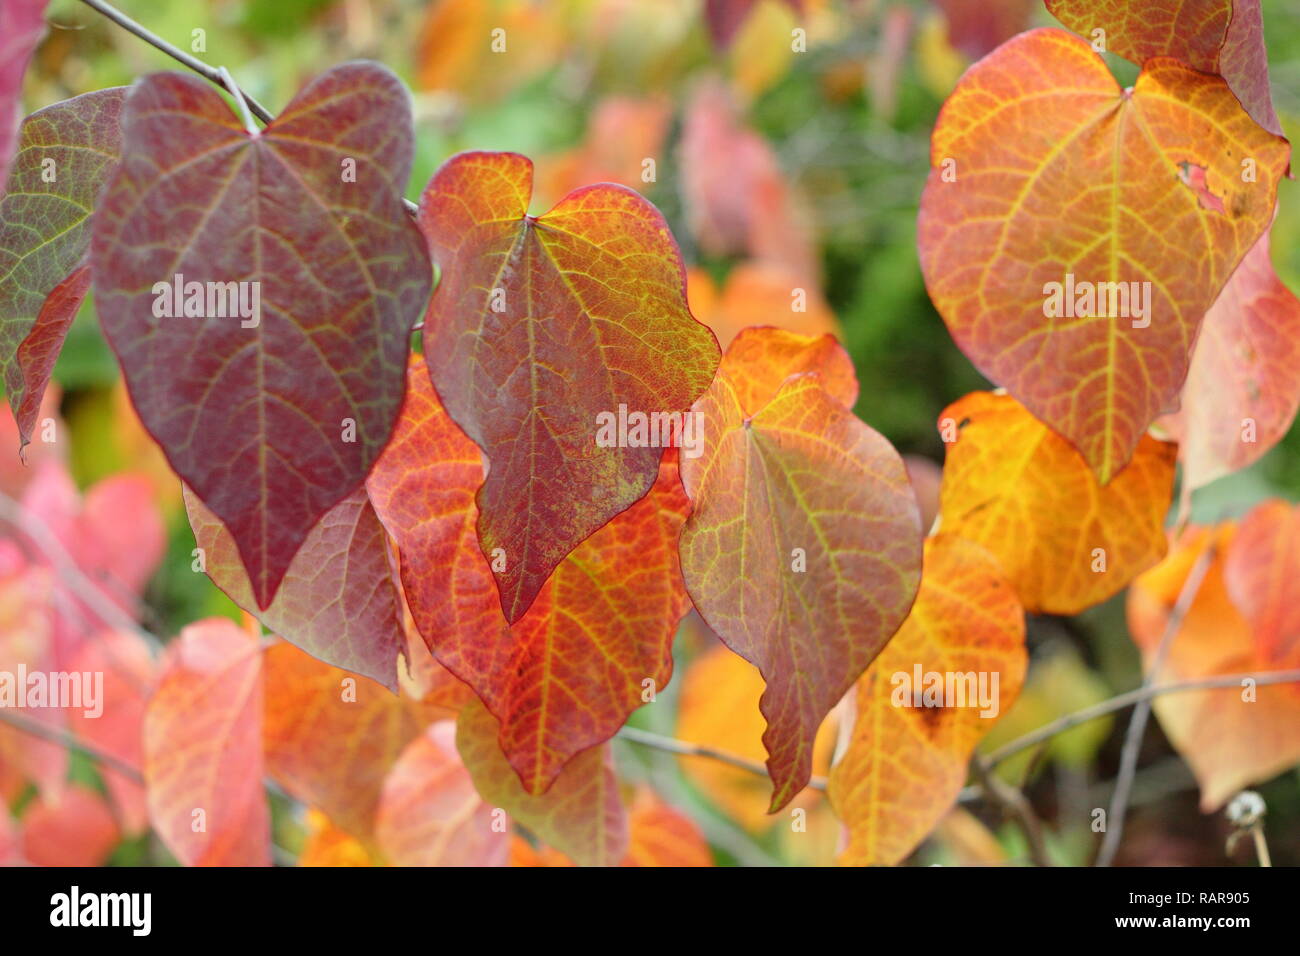 Cercis canadensis. Autumn leaves of Cercis Canadensis Forest Pansy, also called American redbud, October, UK Stock Photo